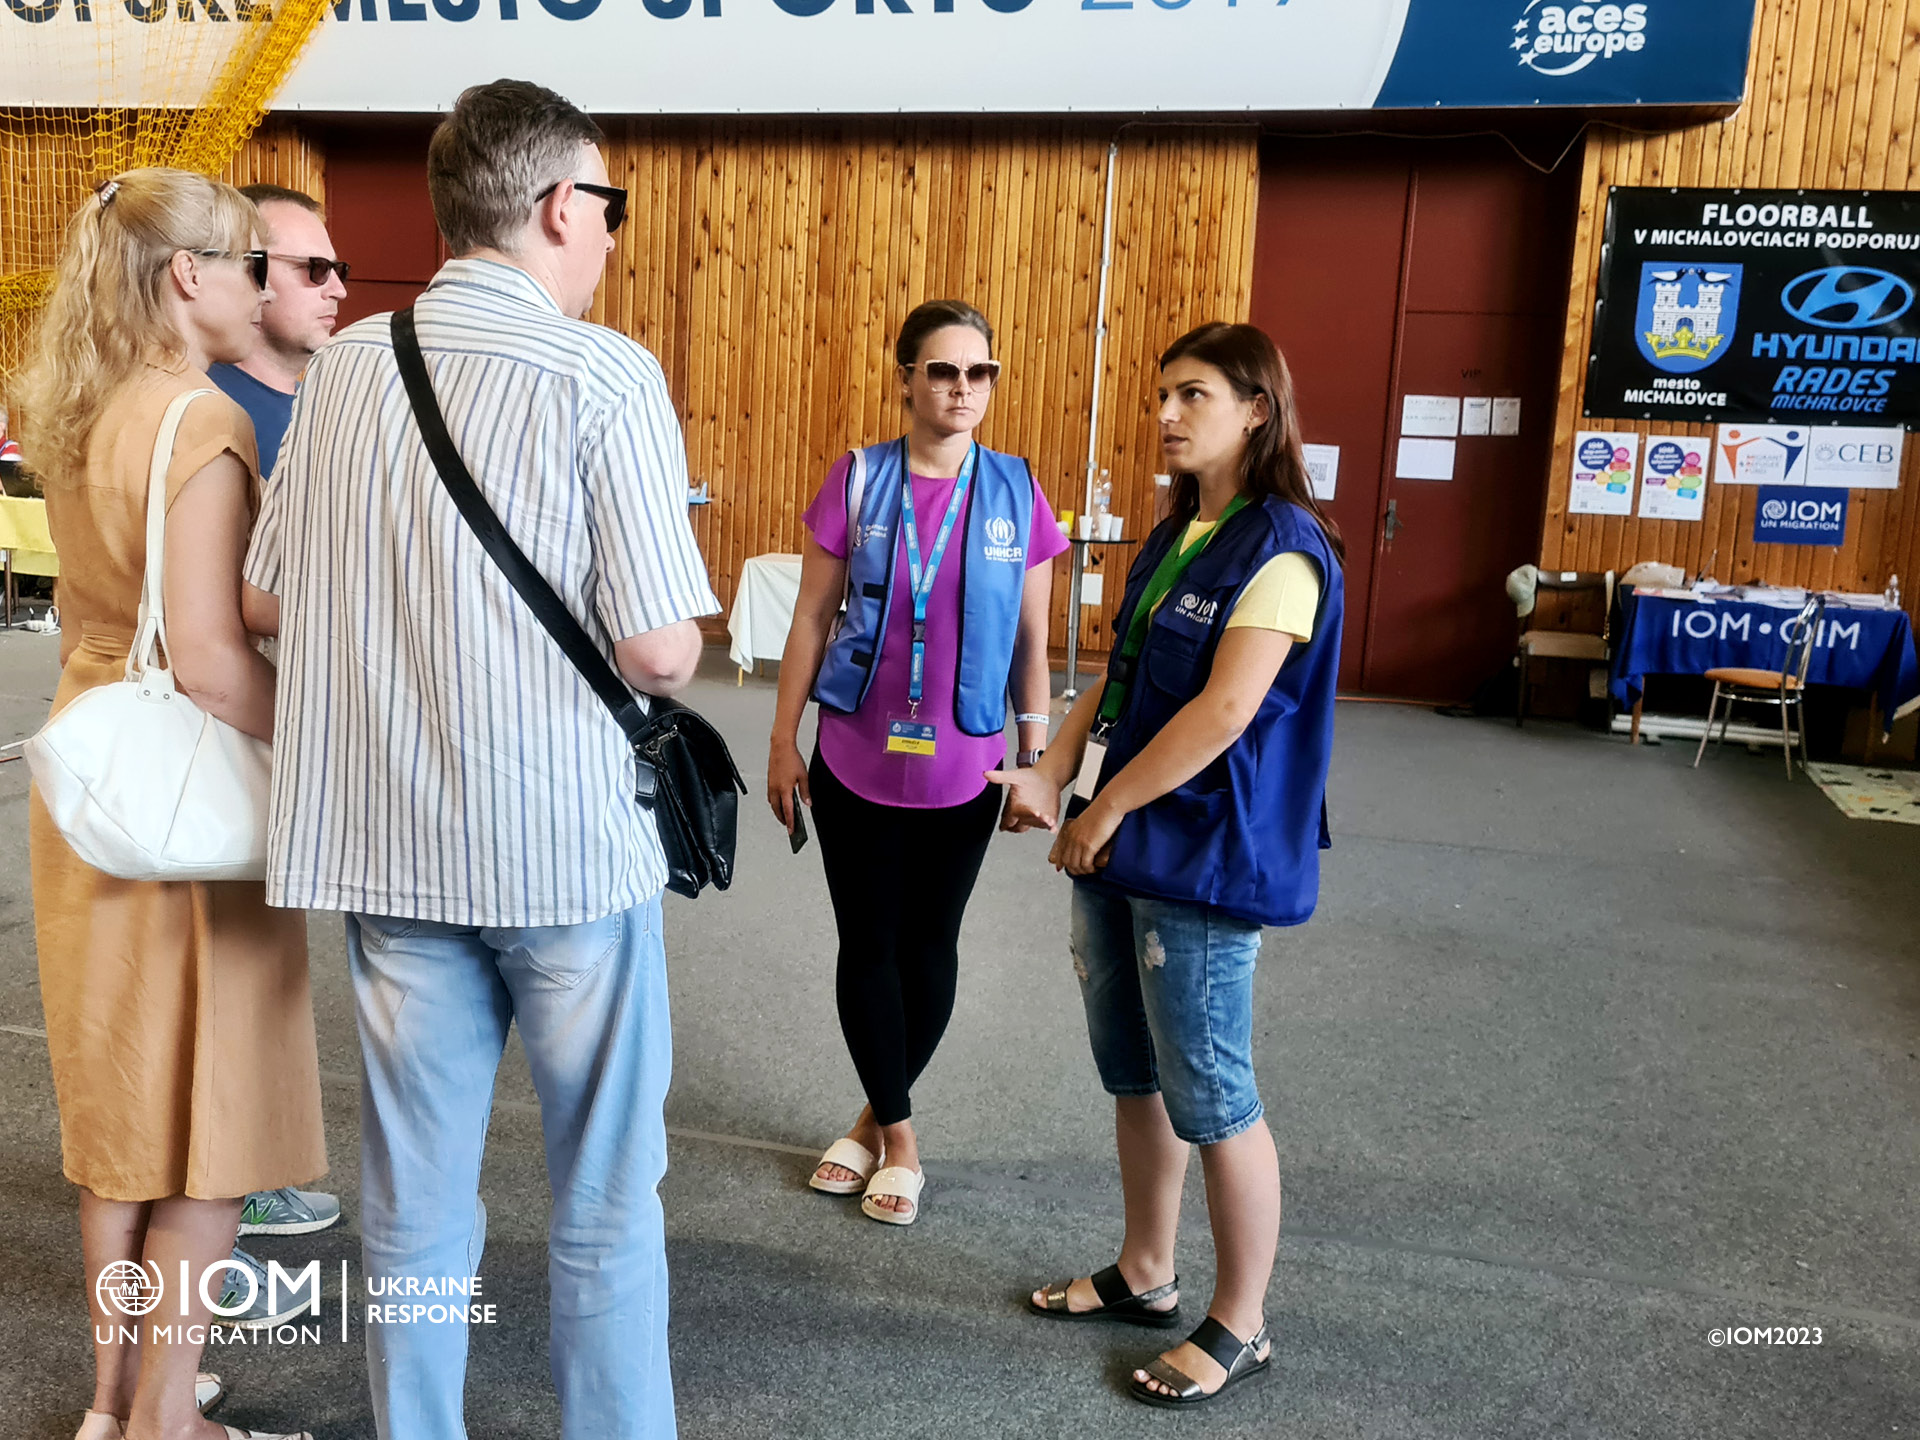 IOM frontline worker advising people with visual impairment from Ukraine and their assistant about necessary travel information. Photo © International Organization for Migration (IOM) 2023.